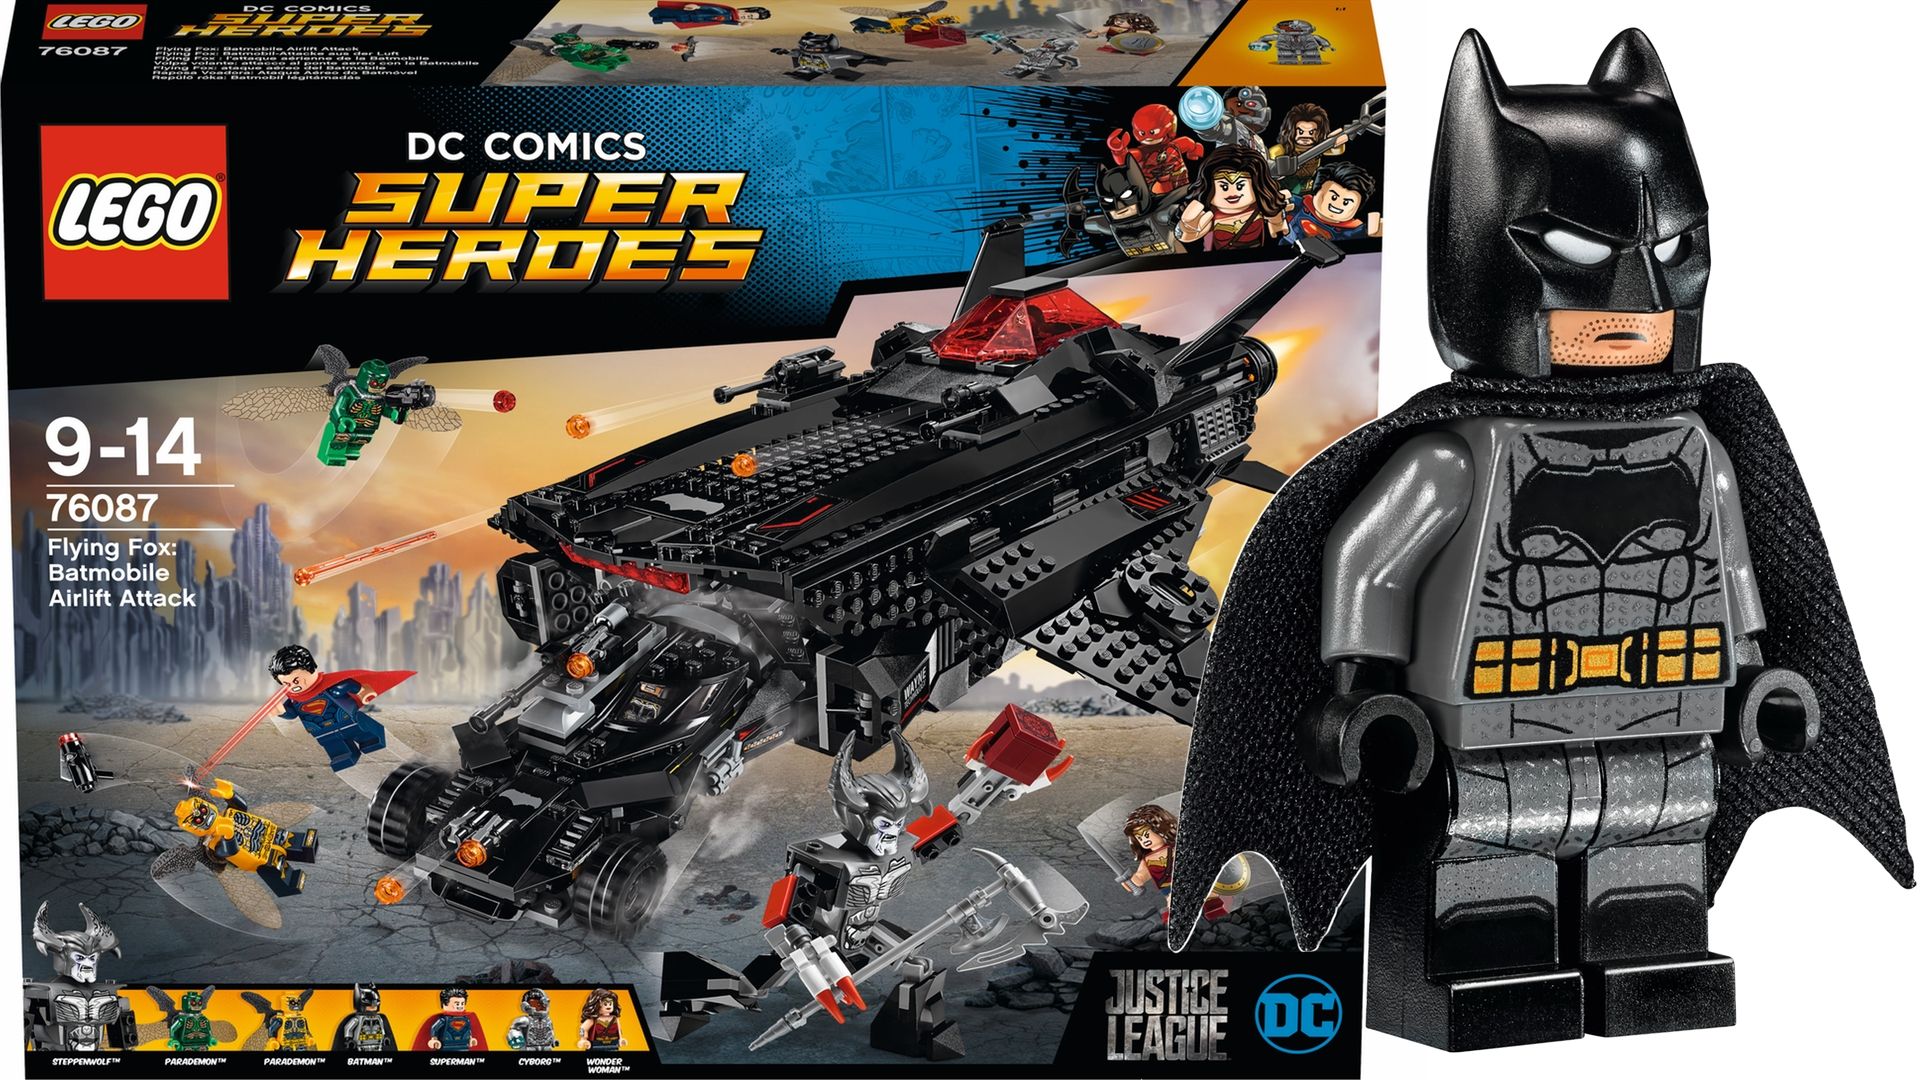 Justice League' LEGO sets showcase Batman's new vehicles, Steppenwolf, Parademons, and more